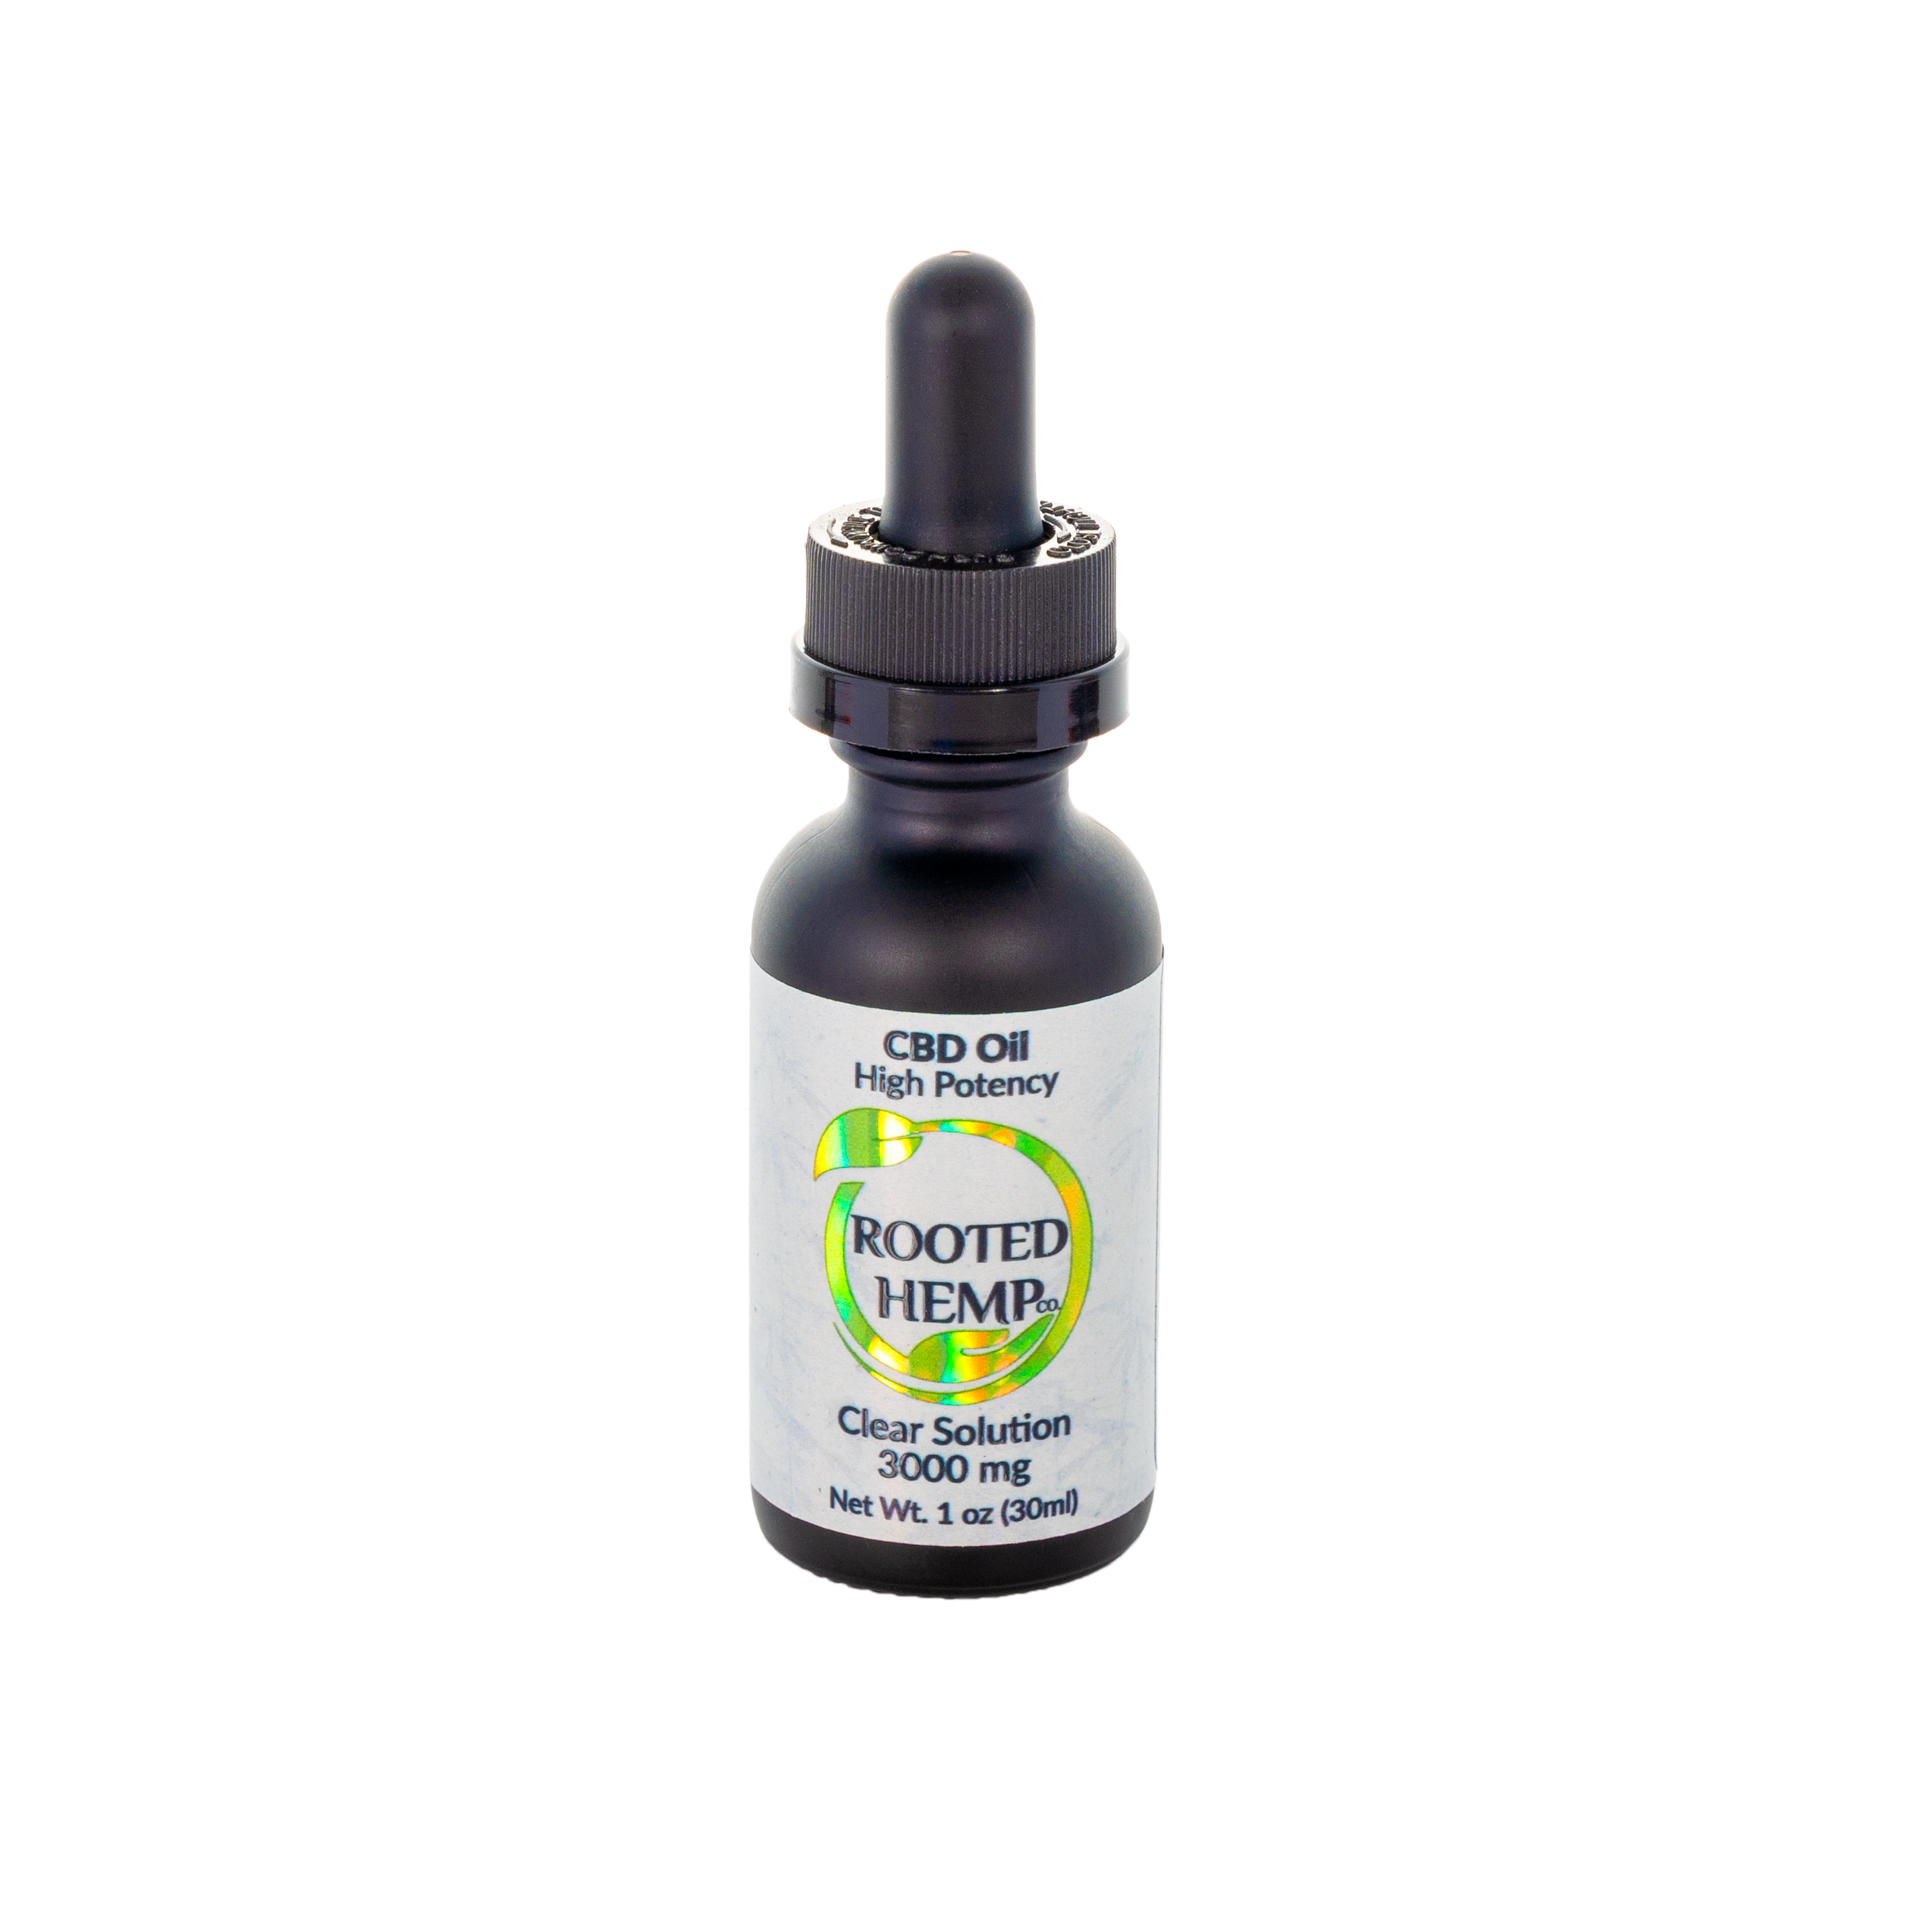 Clear Solution CBD Oil | Rooted Hemp Co | Buy CBD Oil Online